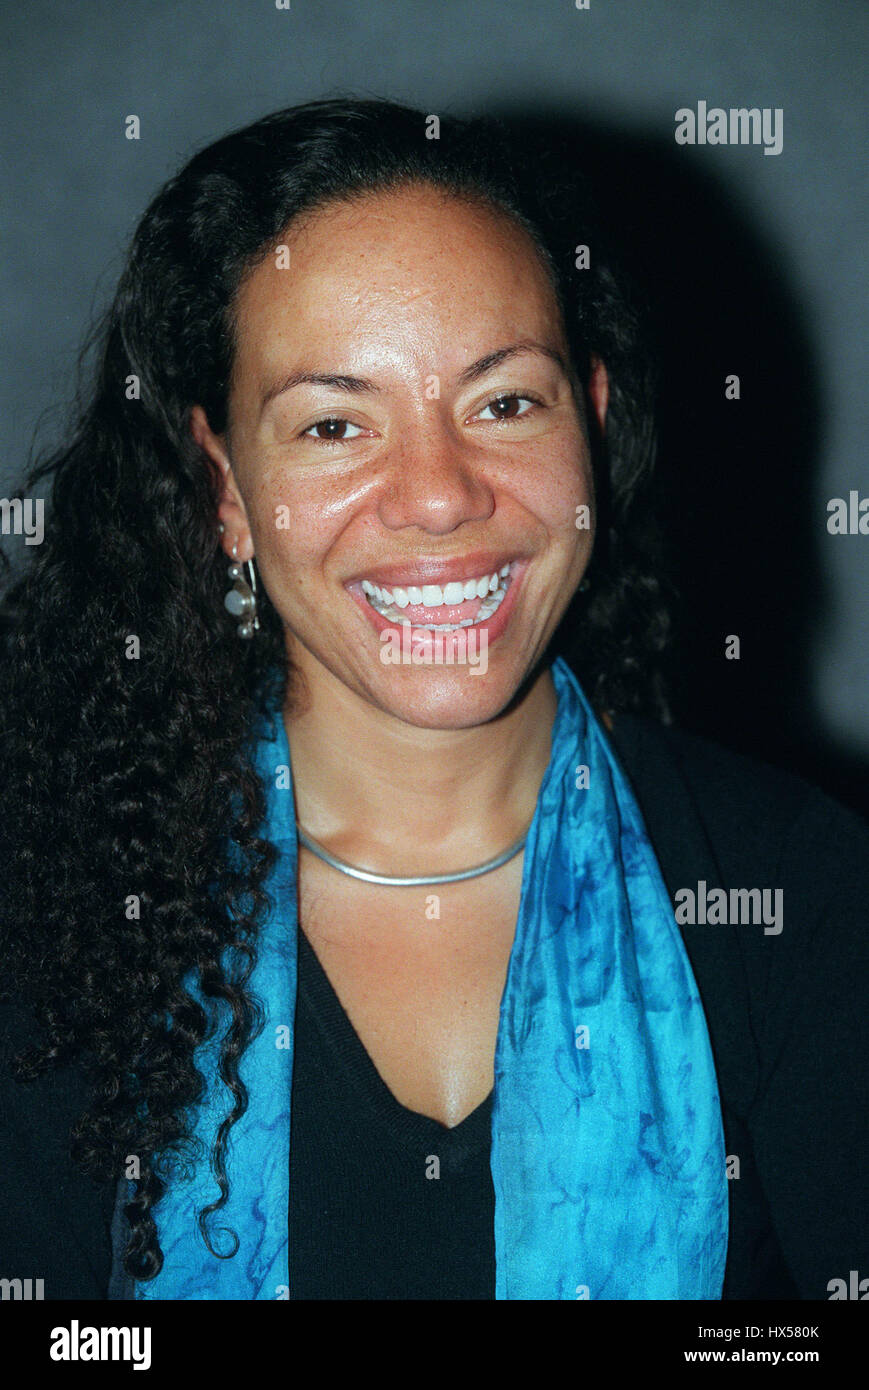 OONA KING MP LABOUR PARTY BETHNAL GREEN 04 October 1999 Stock Photo